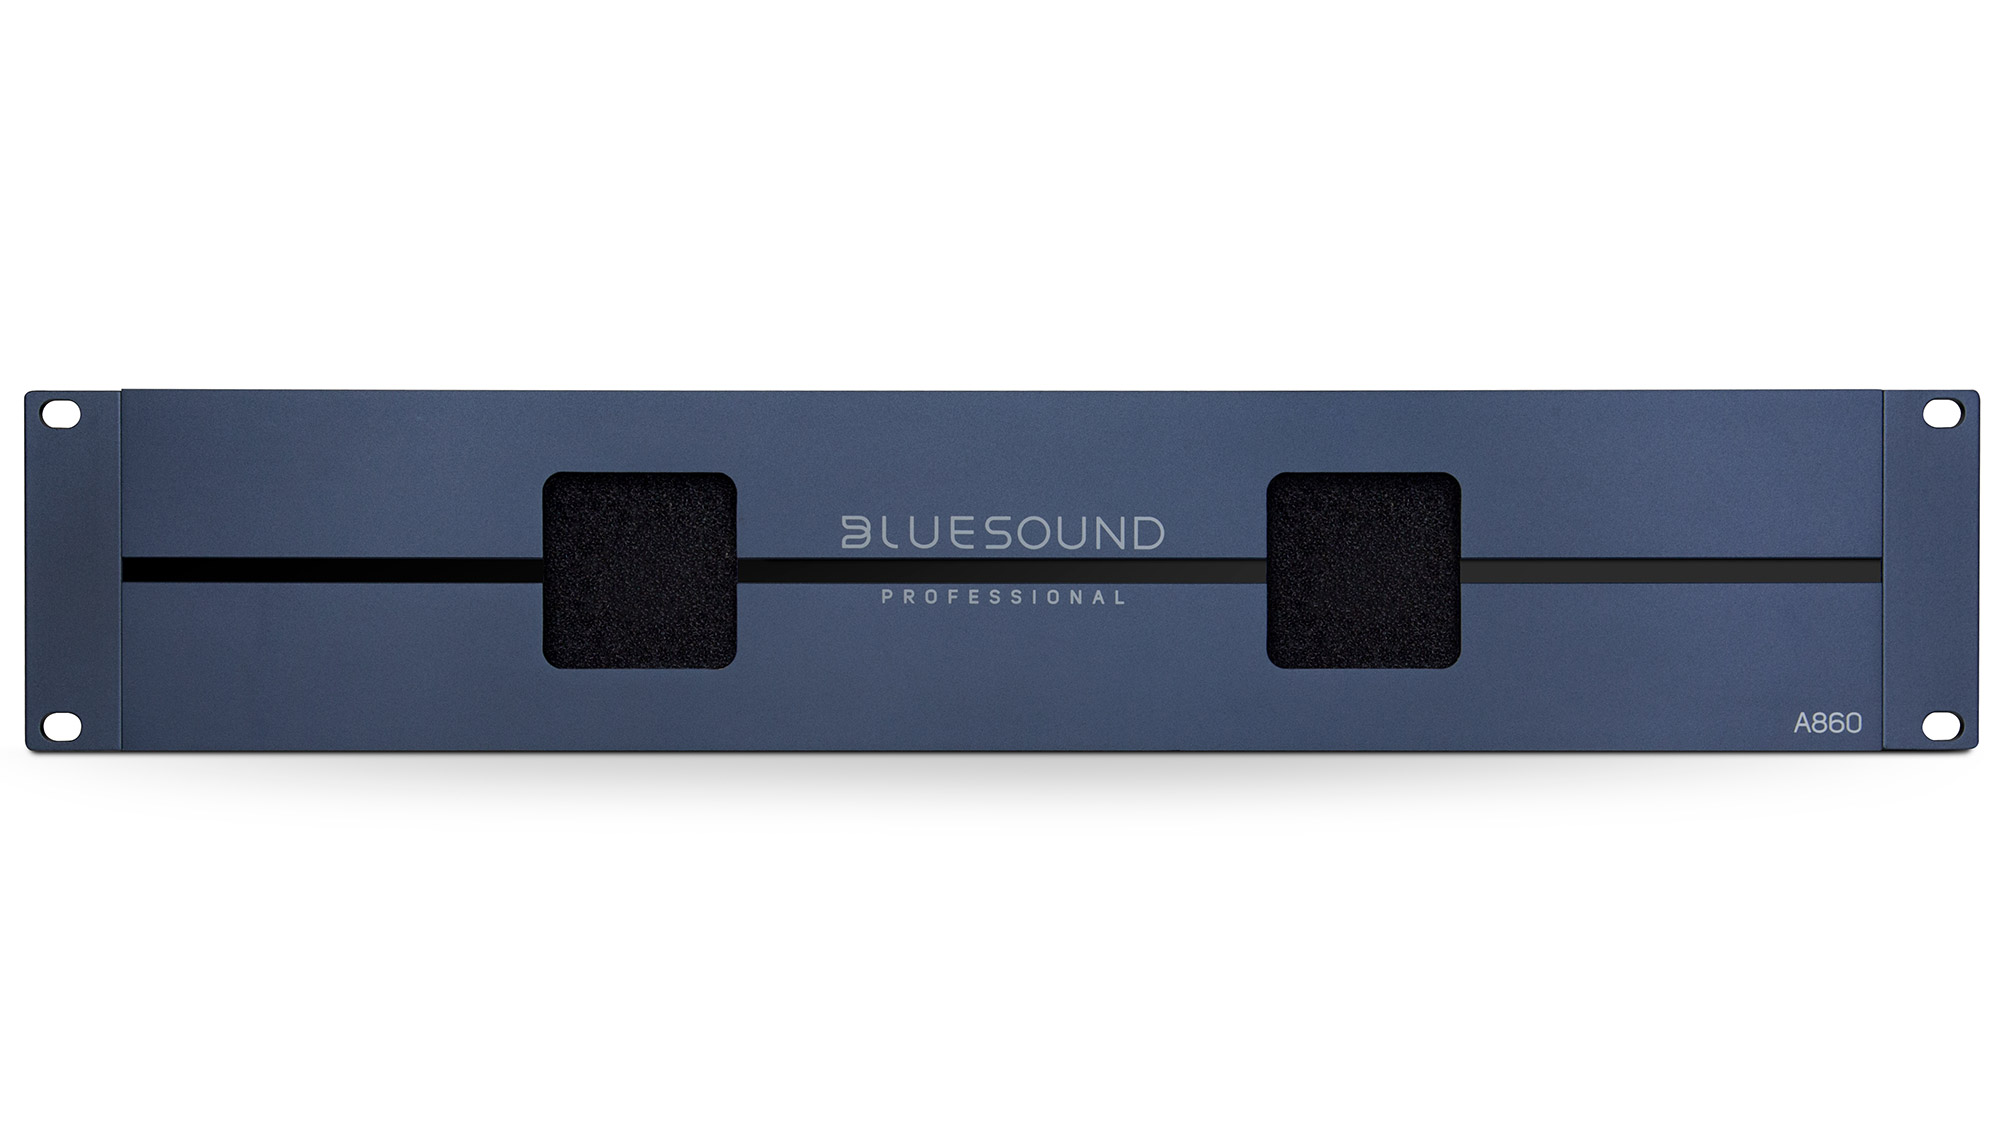 Bluesound Professional A860 Frontansicht